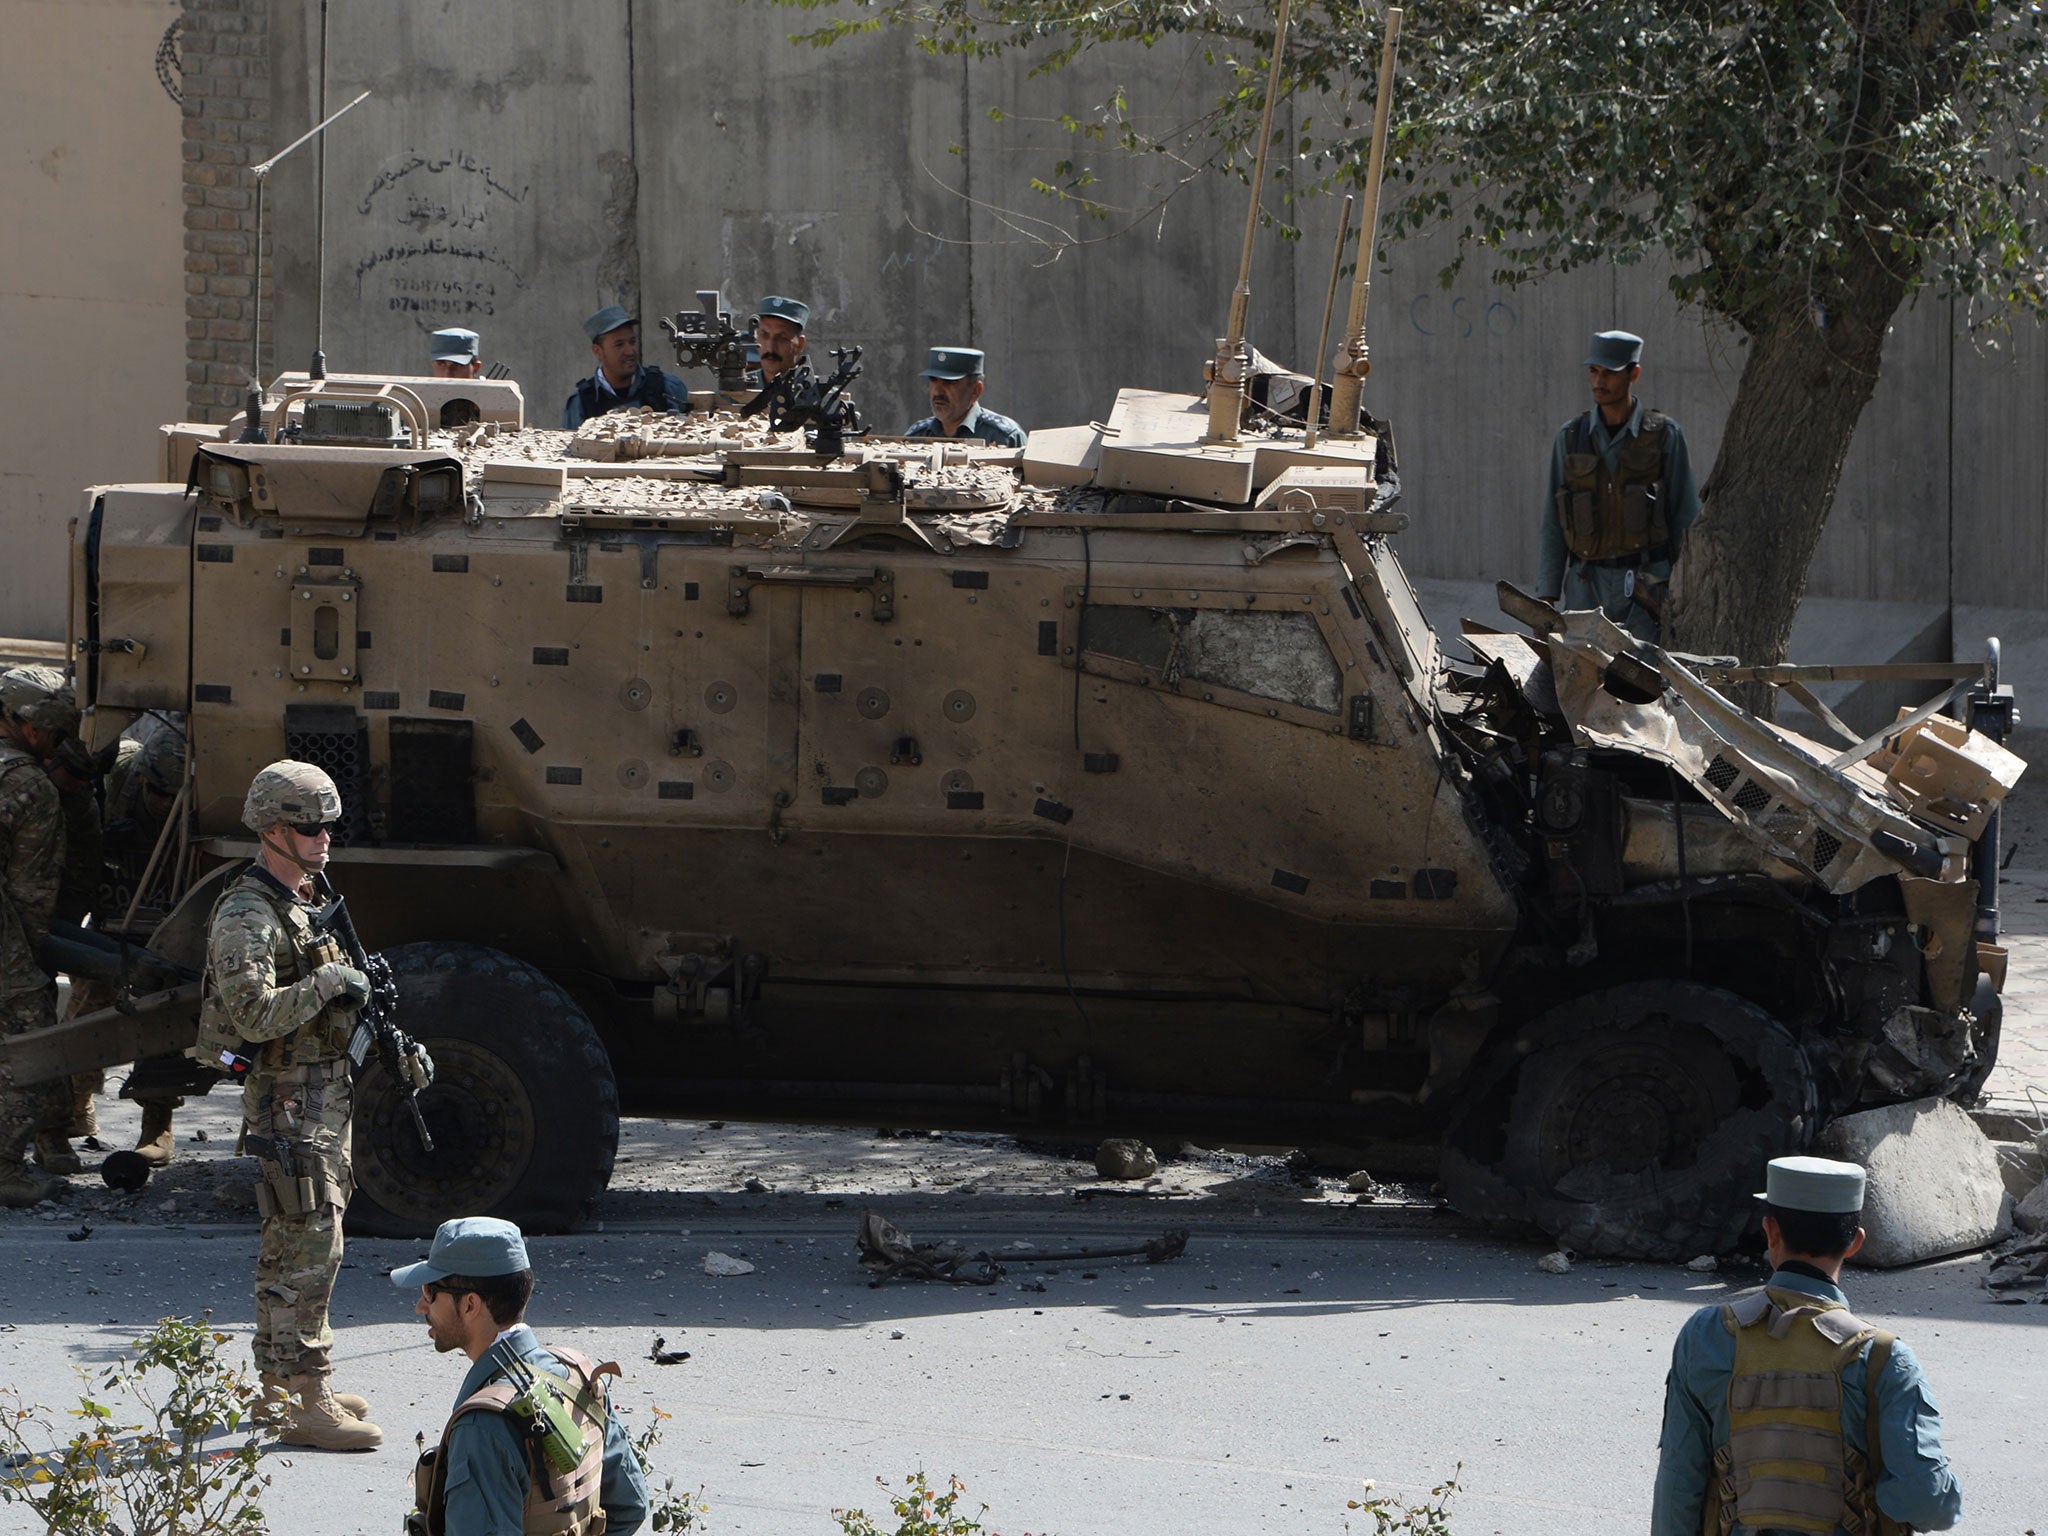 NATO soldiers and Afghan security forces investigate site of a bomb attack that targeted foreign military vehicles at Jo-e-Sher in Kabul on October 11, 2015.